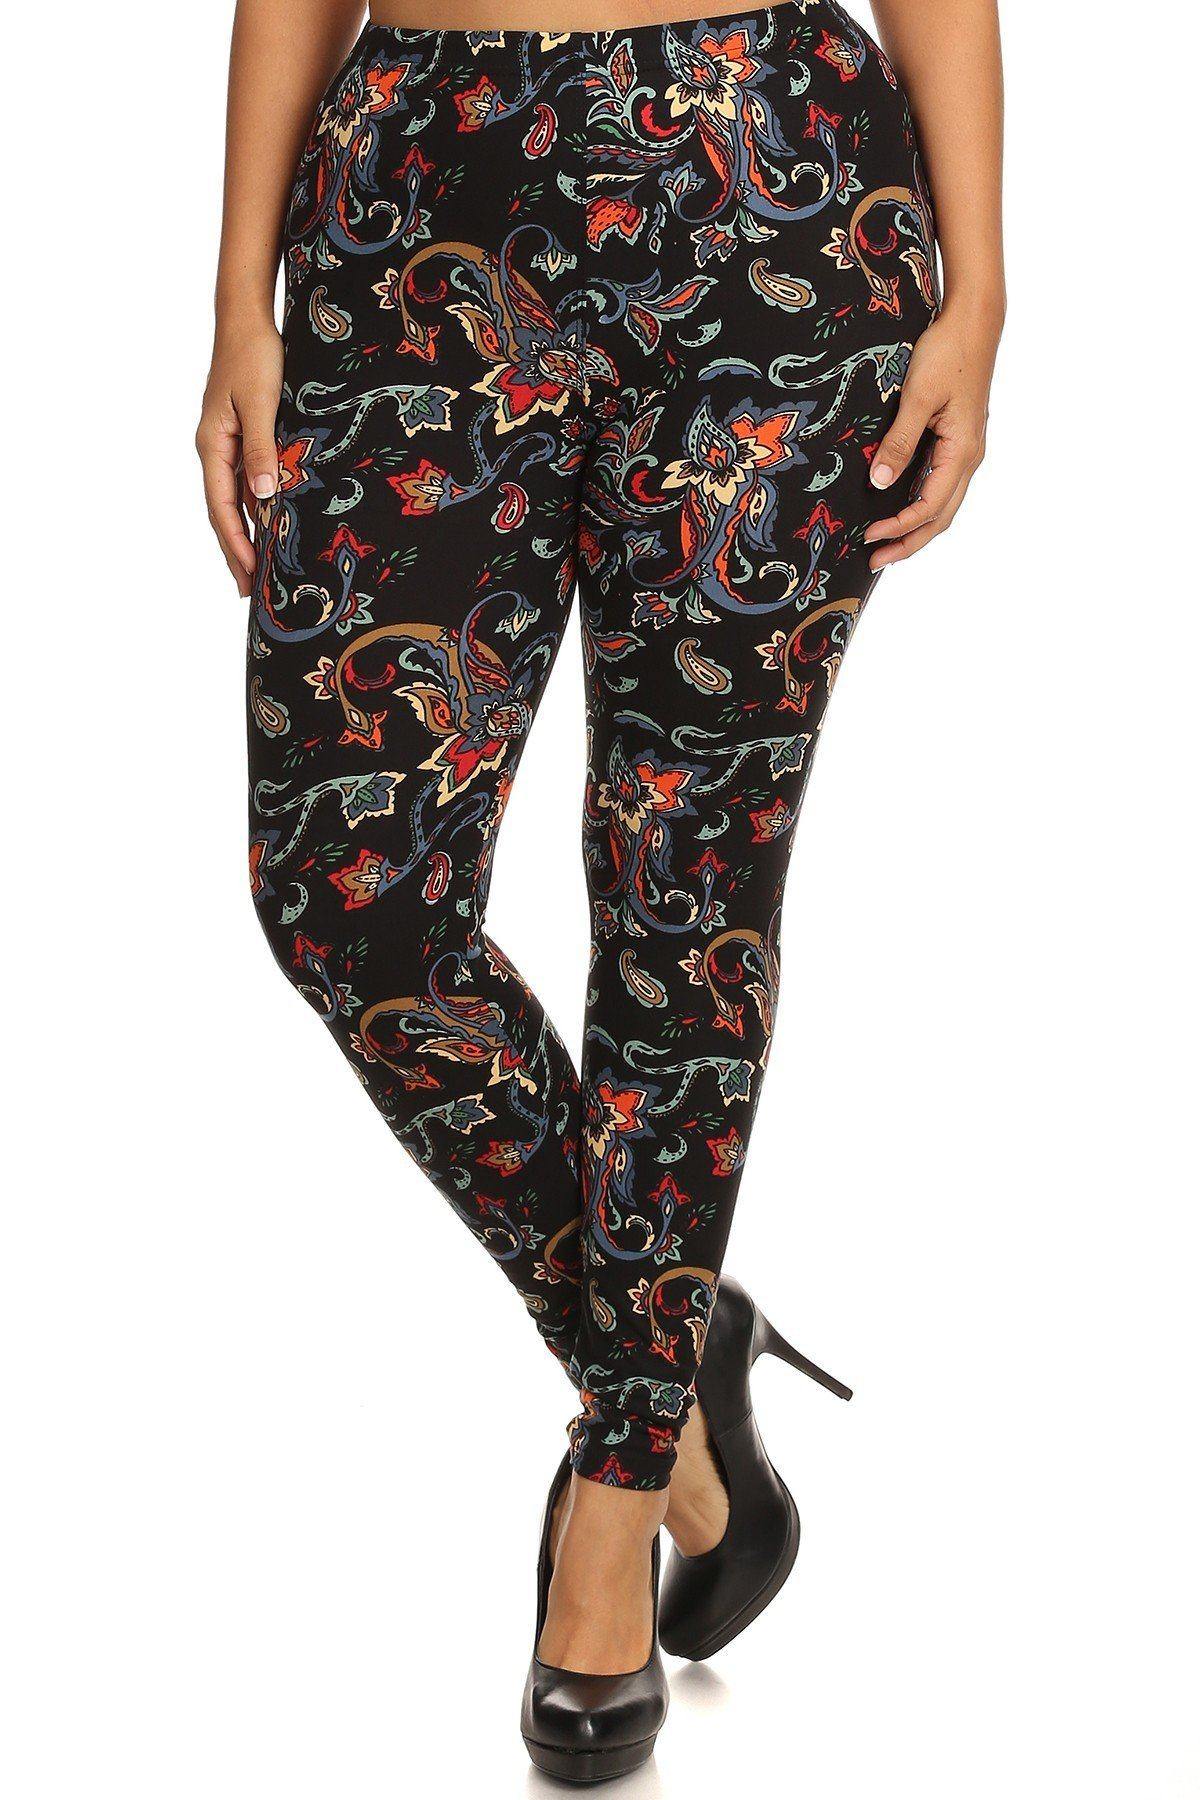 Floral/abstract Print, Full Length Leggings In A Slim Fitting Style With A Banded High Waist - Pearlara